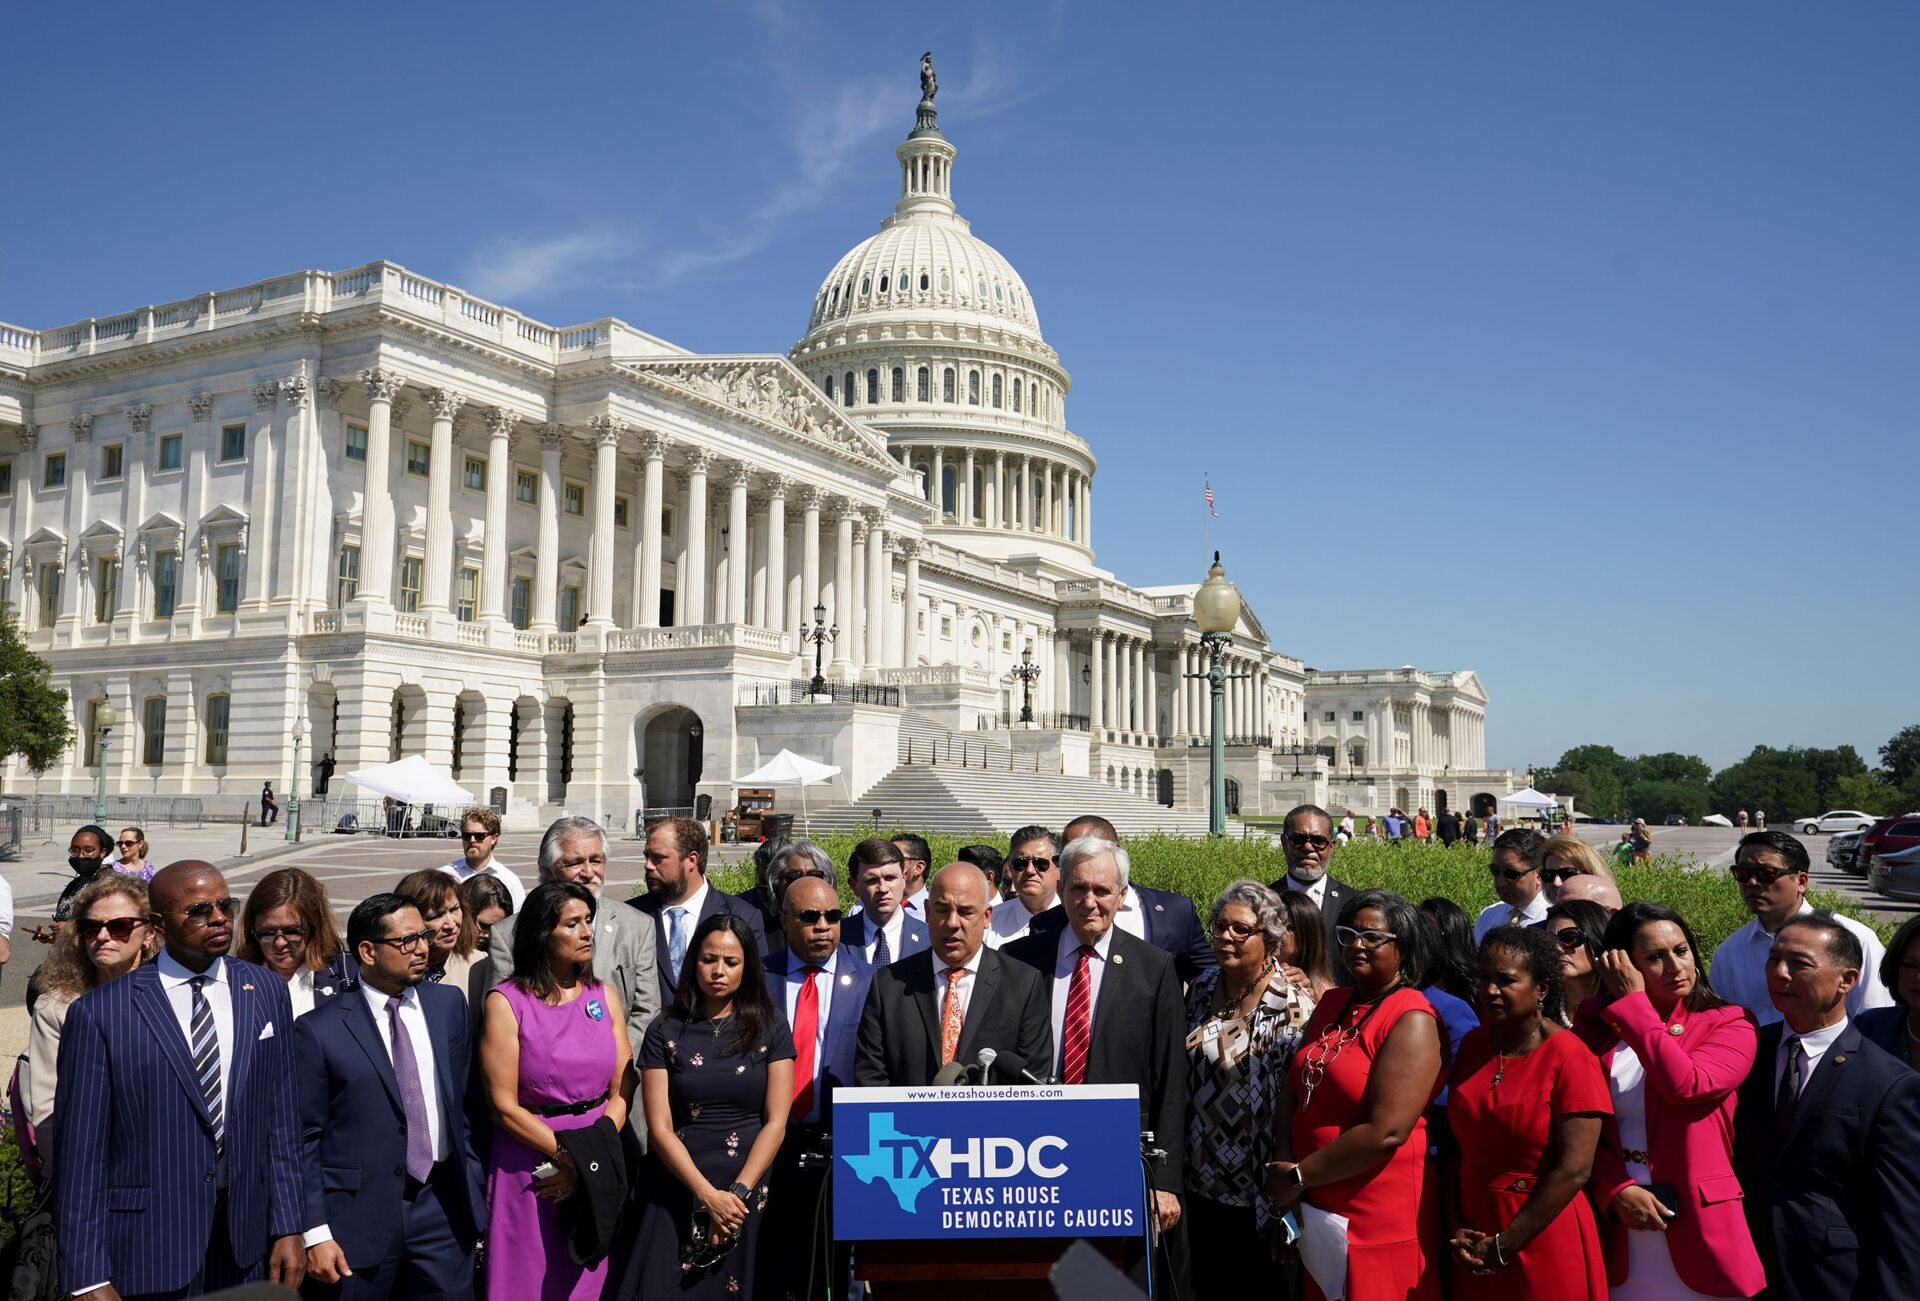 Representative Chris Turner (D-TX) joins other Democratic members of the Texas House of Representatives, who are boycotting a special session of the legislature in an effort to block Republican-backed voting restrictions, as they speak in front of the U.S. Capitol in Washington, U.S., July 13, 2021 - Sputnik International, 1920, 07.09.2021